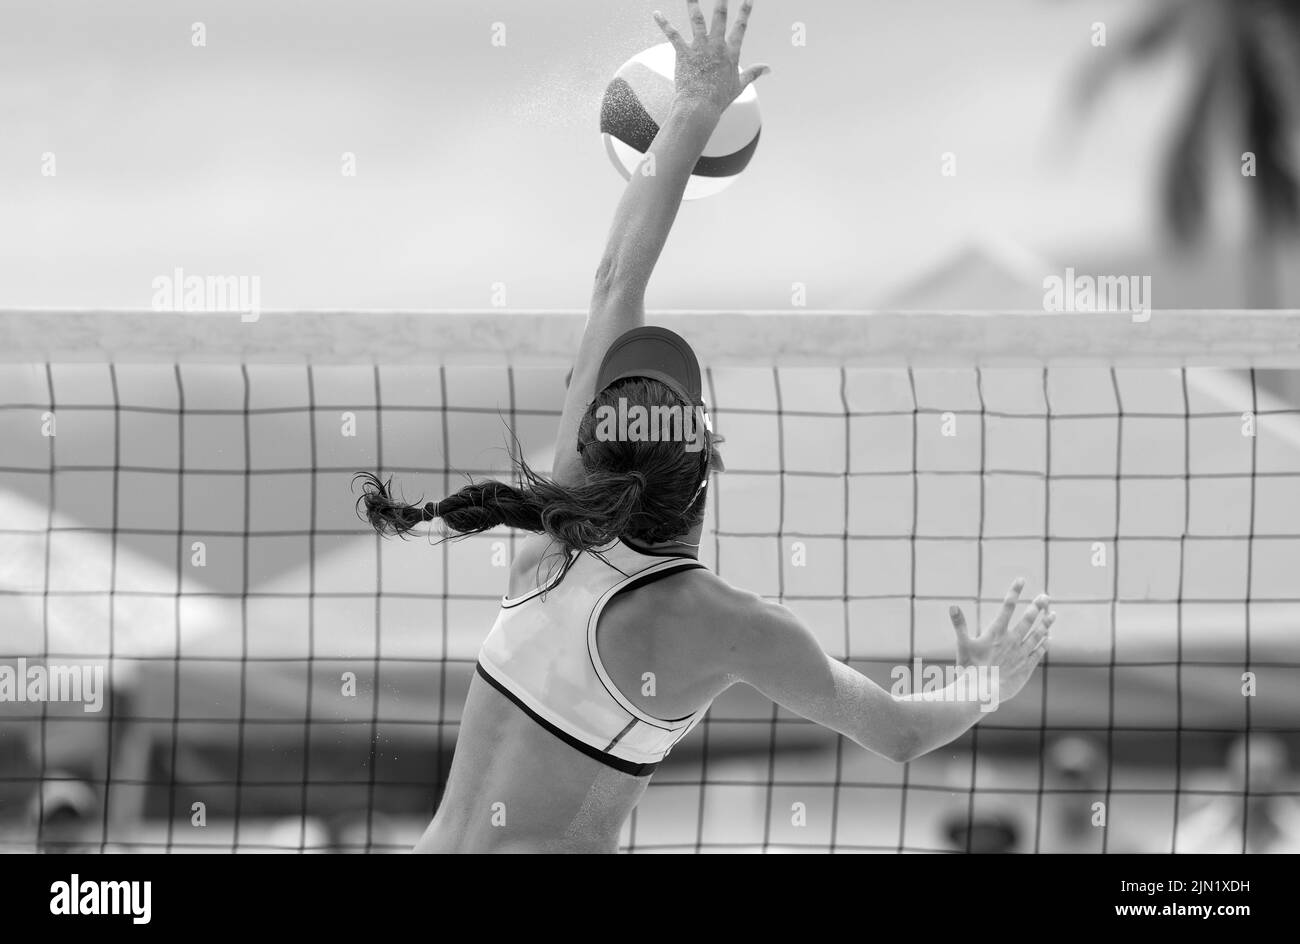 A Beach Volleyball Player Is Rising Up To Spike The Ball In Black And White Banner Image Format Stock Photo